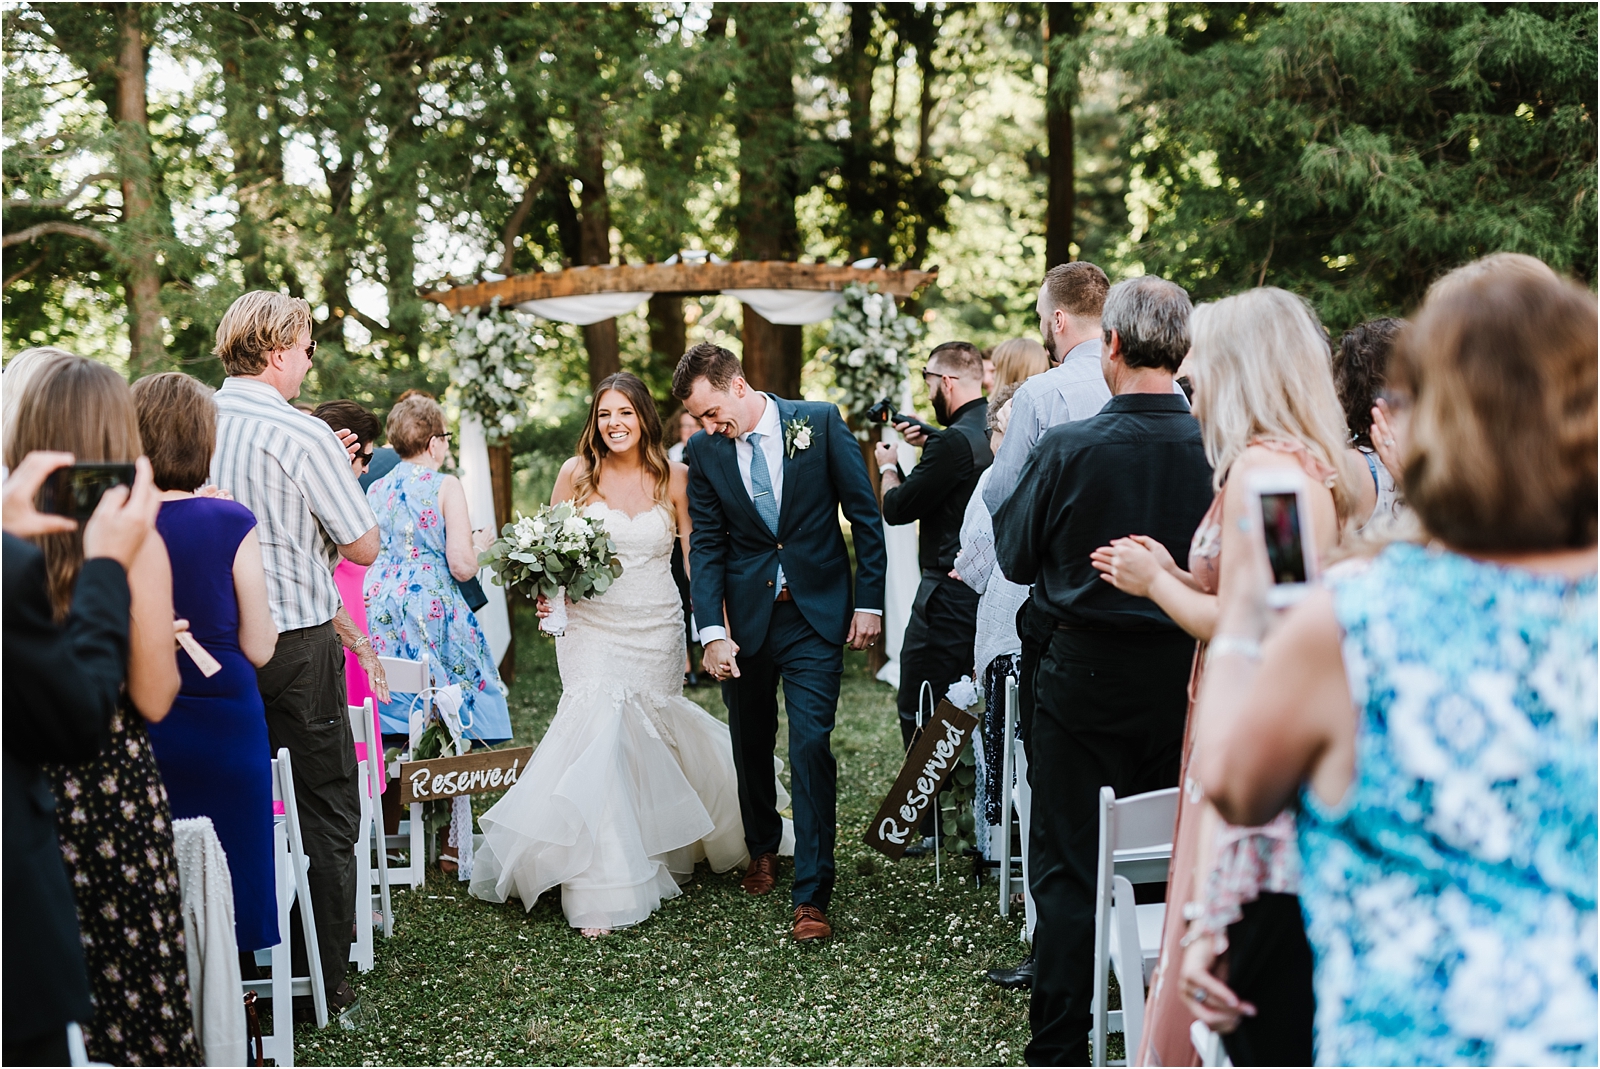 Sunny Summer Wedding at The Stevens Estate at Osgood Hill in North Andover, MA by Boston Wedding Photographer Annmarie Swift